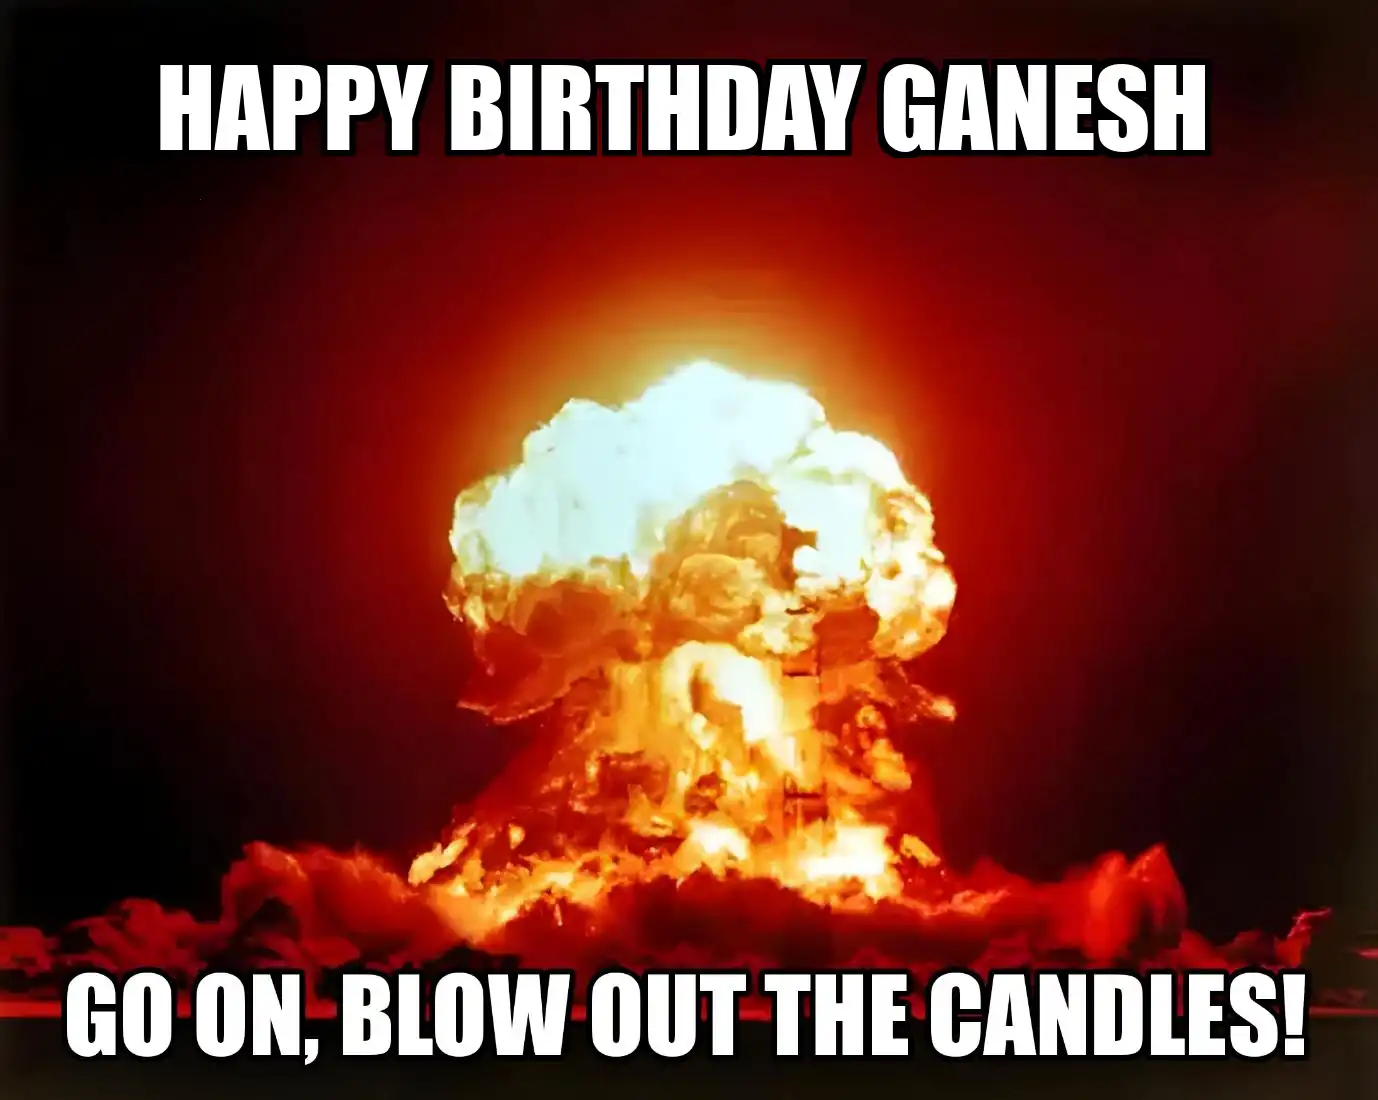 Happy Birthday Ganesh Go On Blow Out The Candles Meme